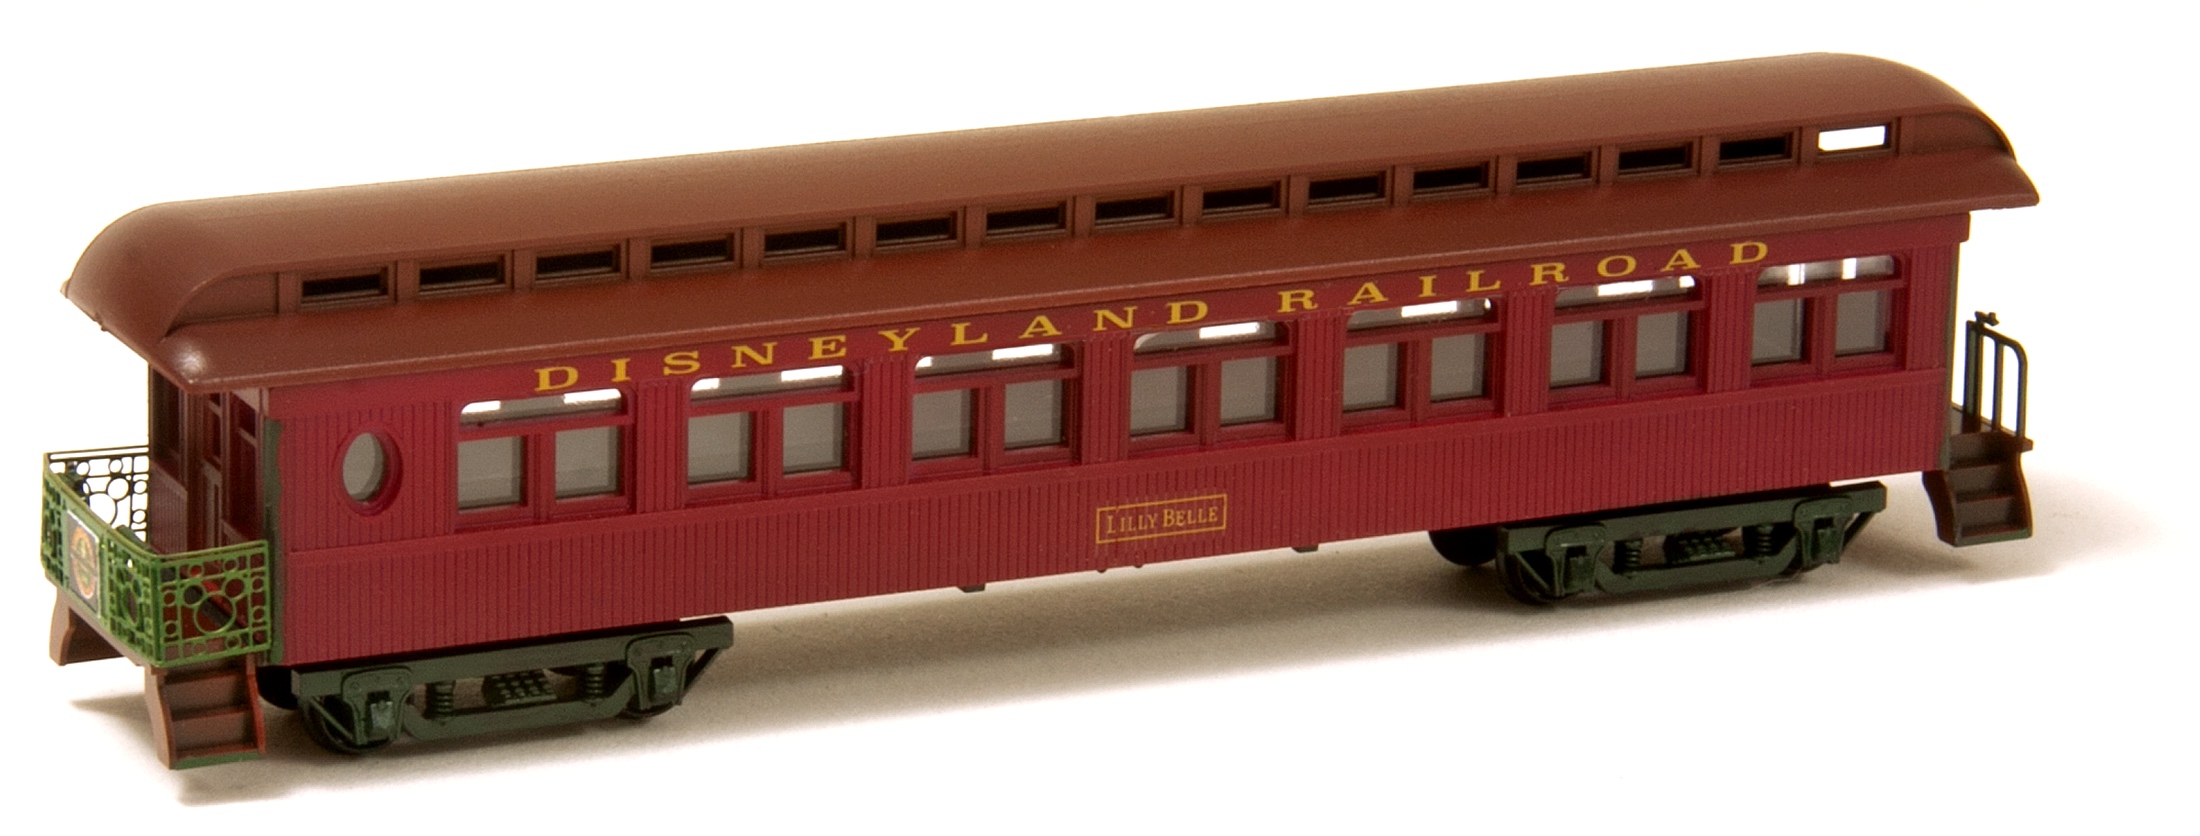 N Scale - RailSmith - Lilly Belle - Passenger Car, Heavyweight, Observation Concept Car - Carolwood Pacific - Lilly Belle